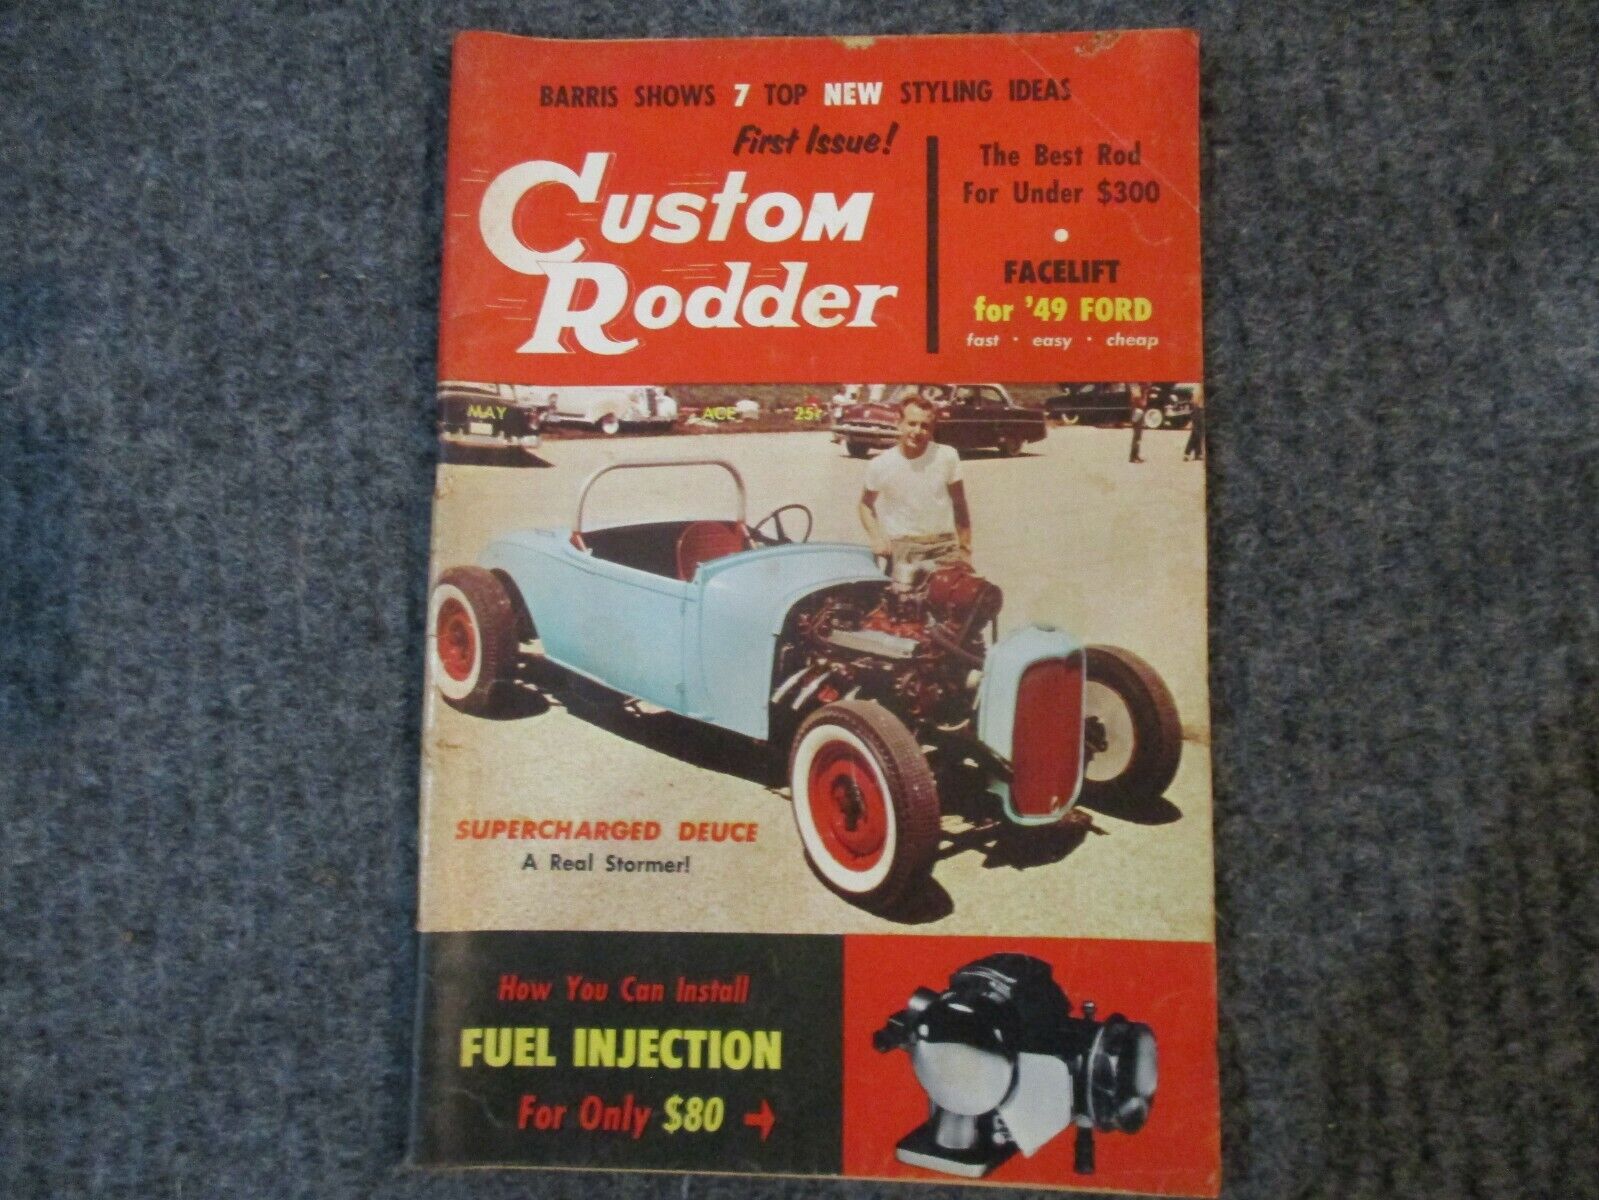 VINTAGE 1957 FIRST ISSUSE OF CUSTOM RODDER-1957--62 PAGES--8X5 1/4 BOOK